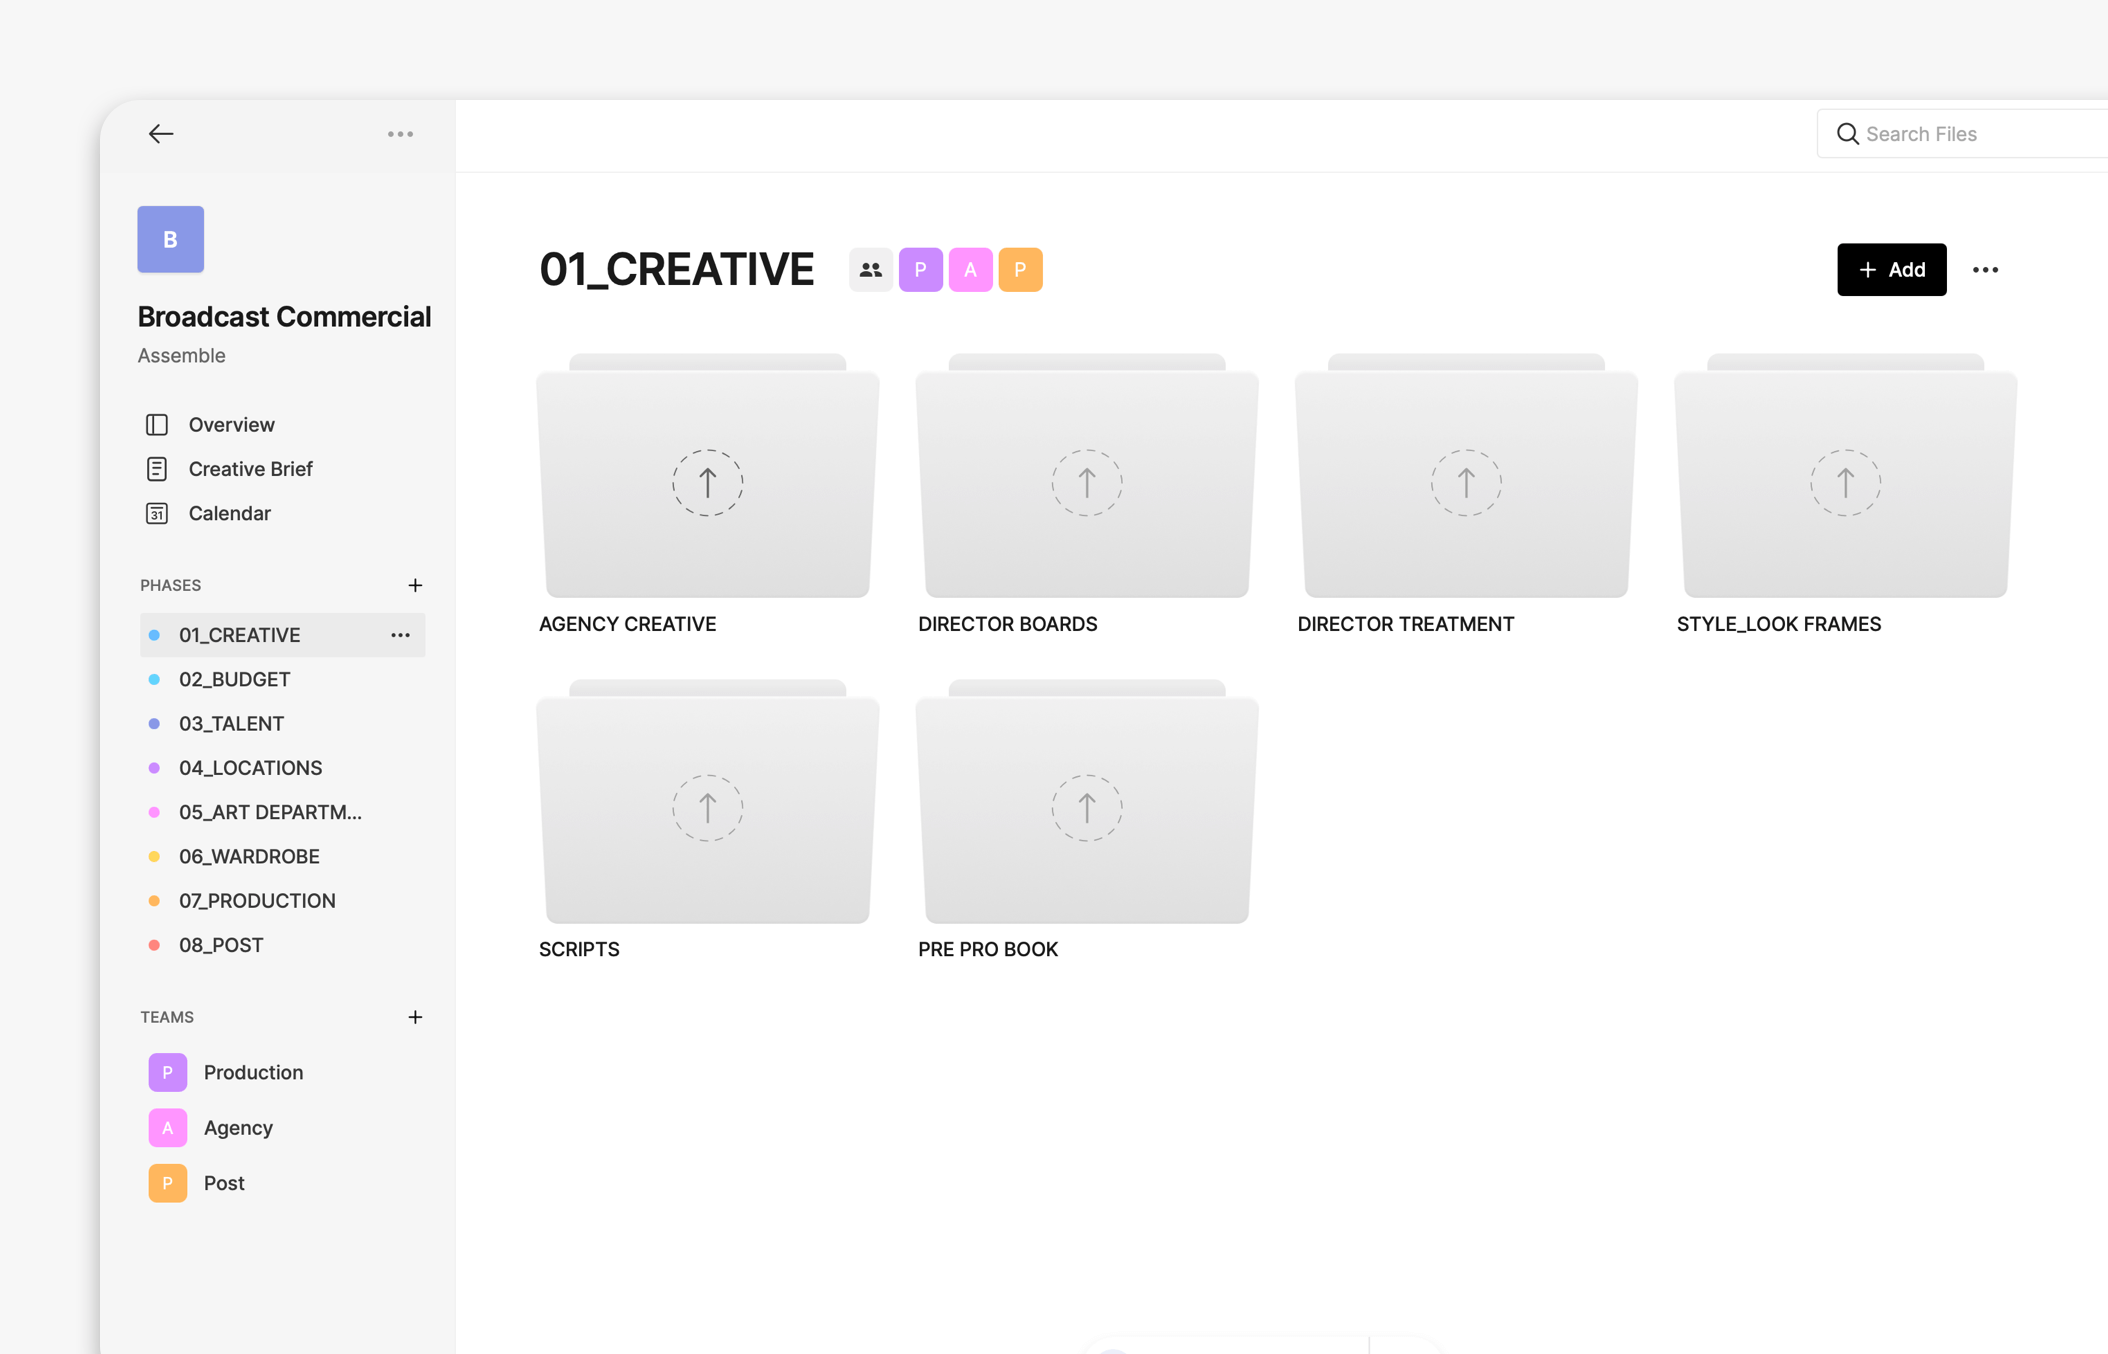 Organize your files in folders